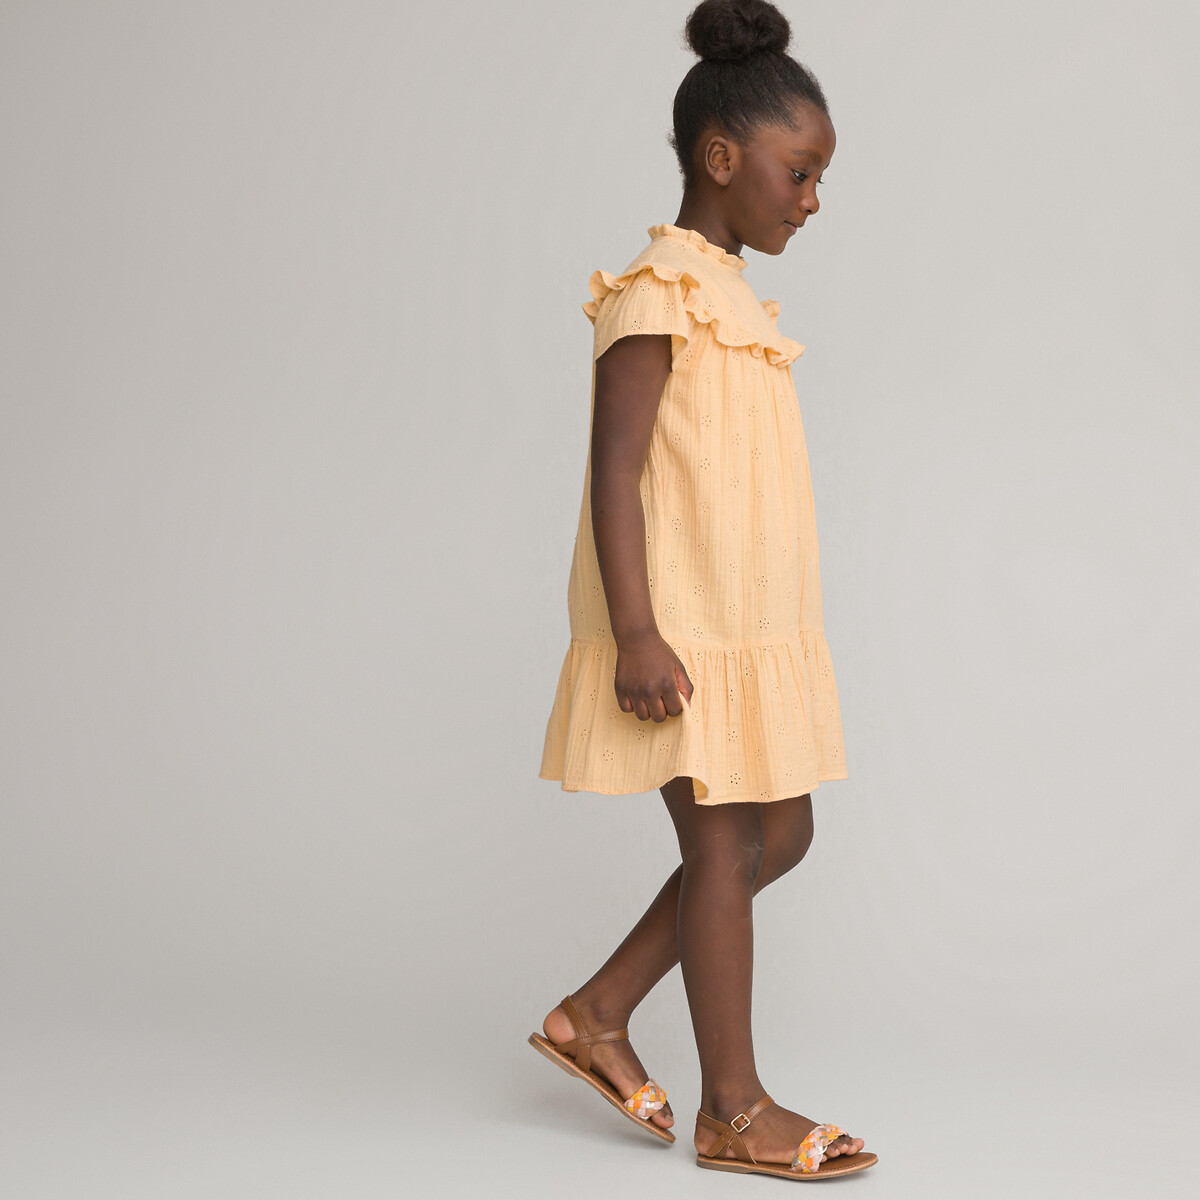 Embroidered cotton muslin dress with ruffles, yellow, La Redoute ...